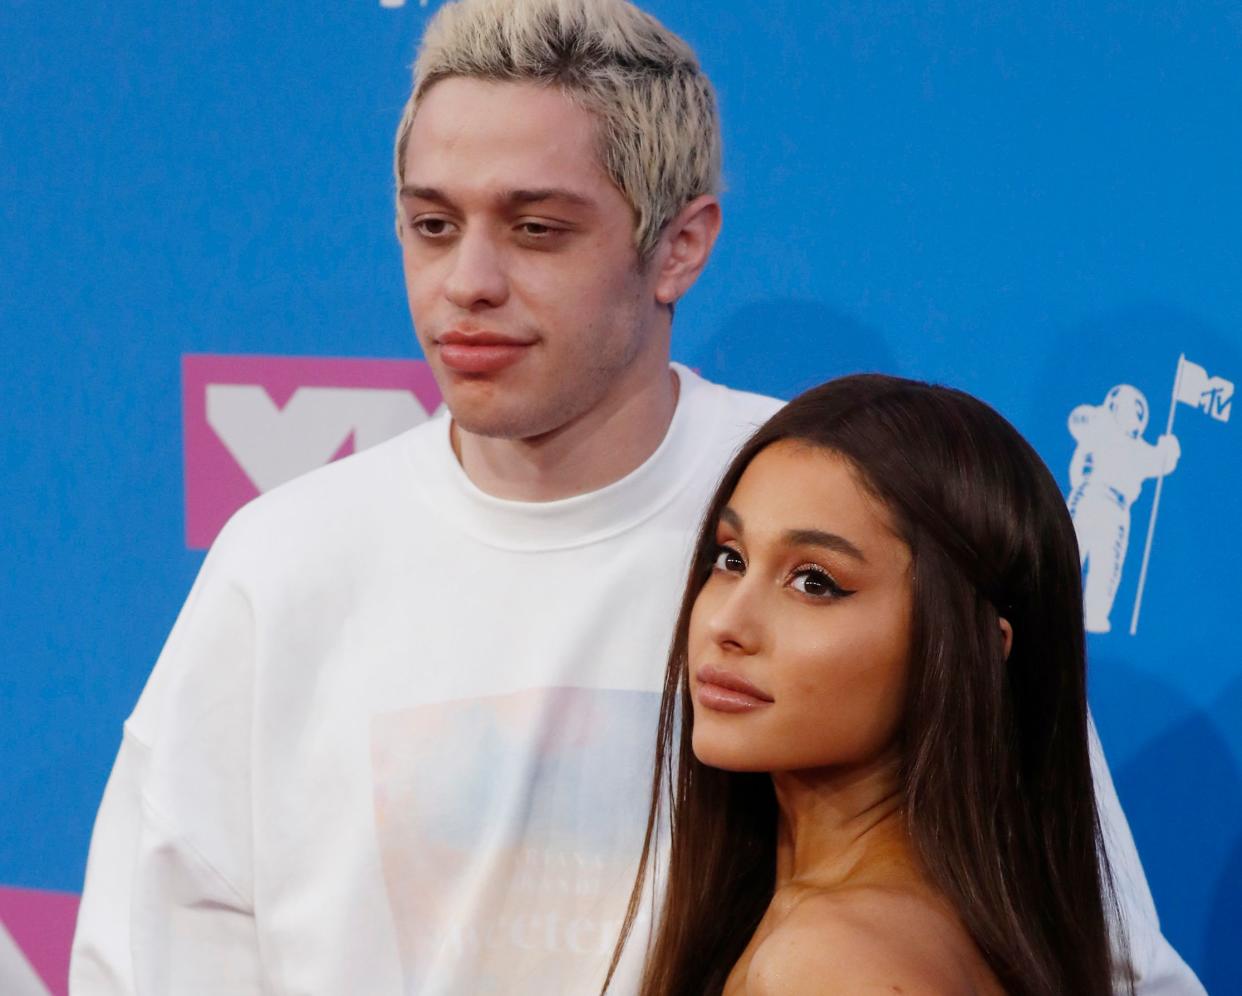 Pete Davidson and Ariana Grande arrive at the 2018 MTV Video Music Awards.&nbsp; (Photo: Andrew Kelly / Reuters)